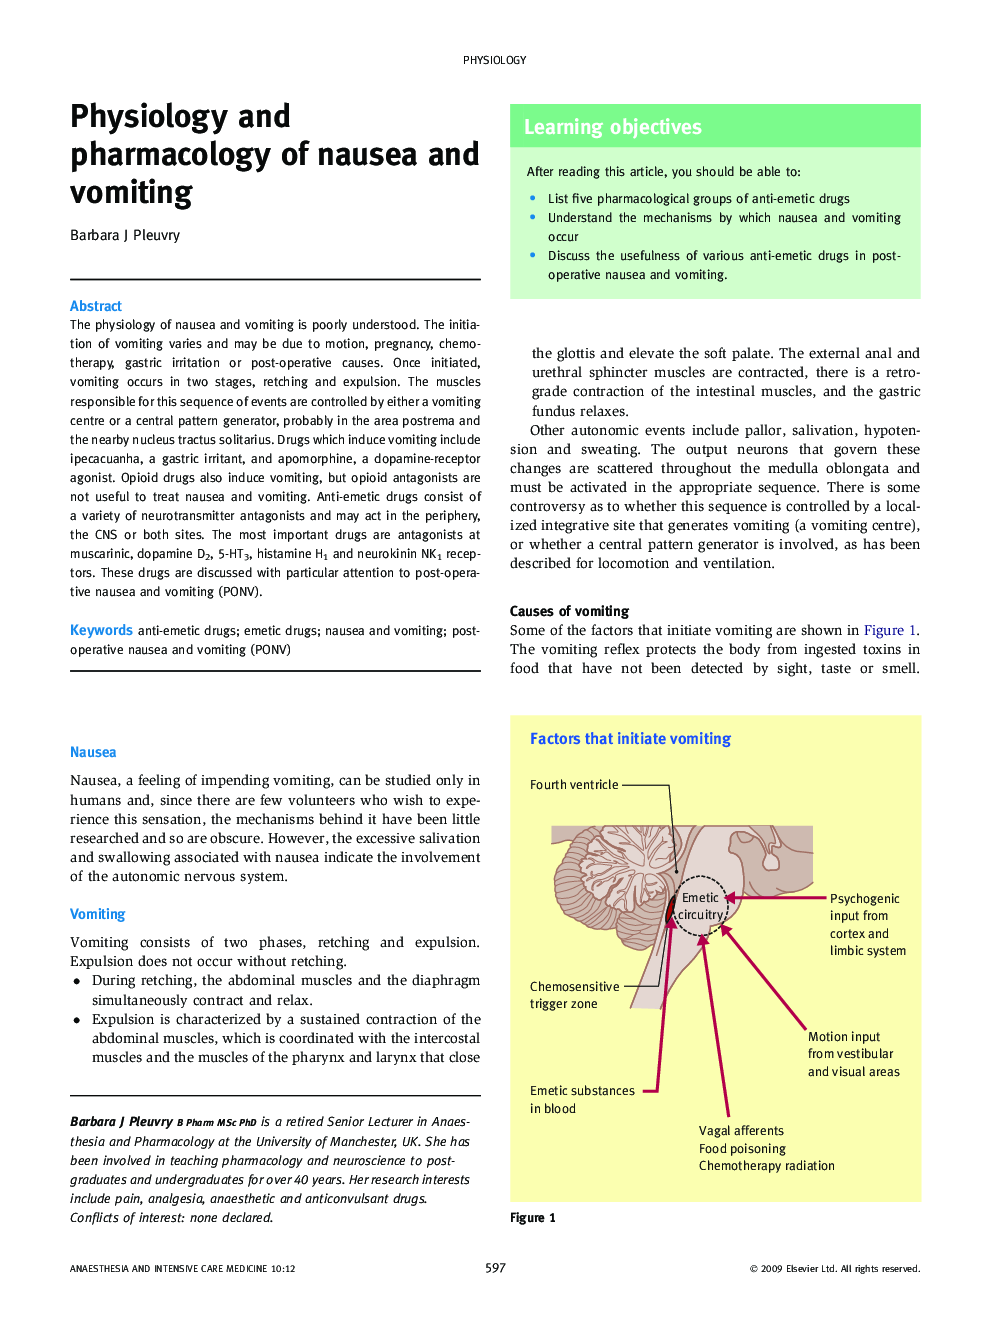 Physiology and pharmacology of nausea and vomiting